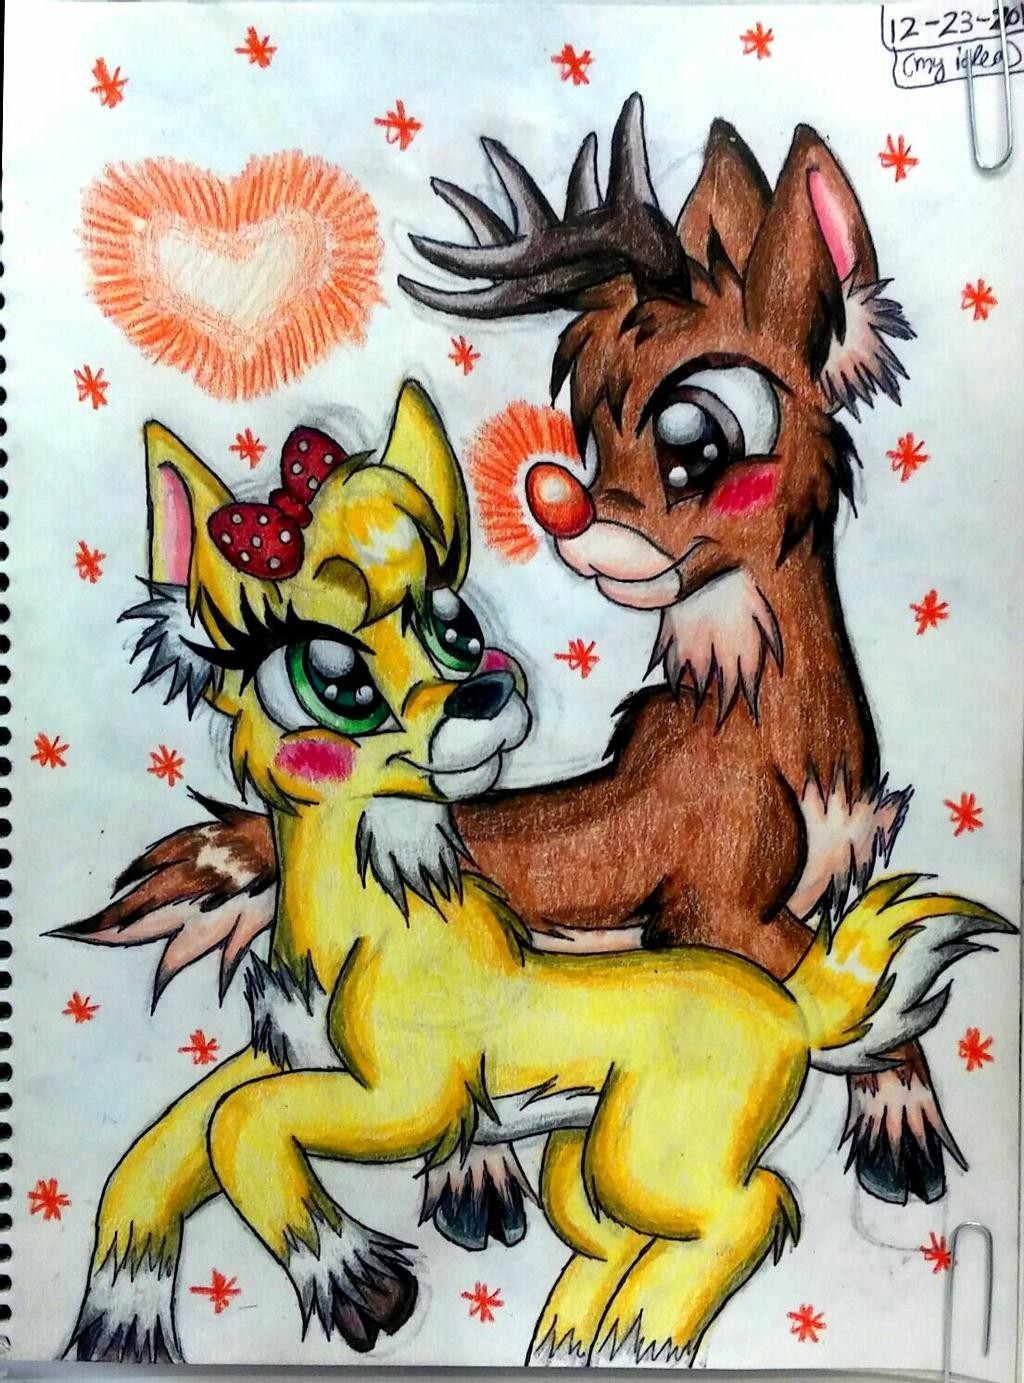 Rudolph and Clarice by SugarPop